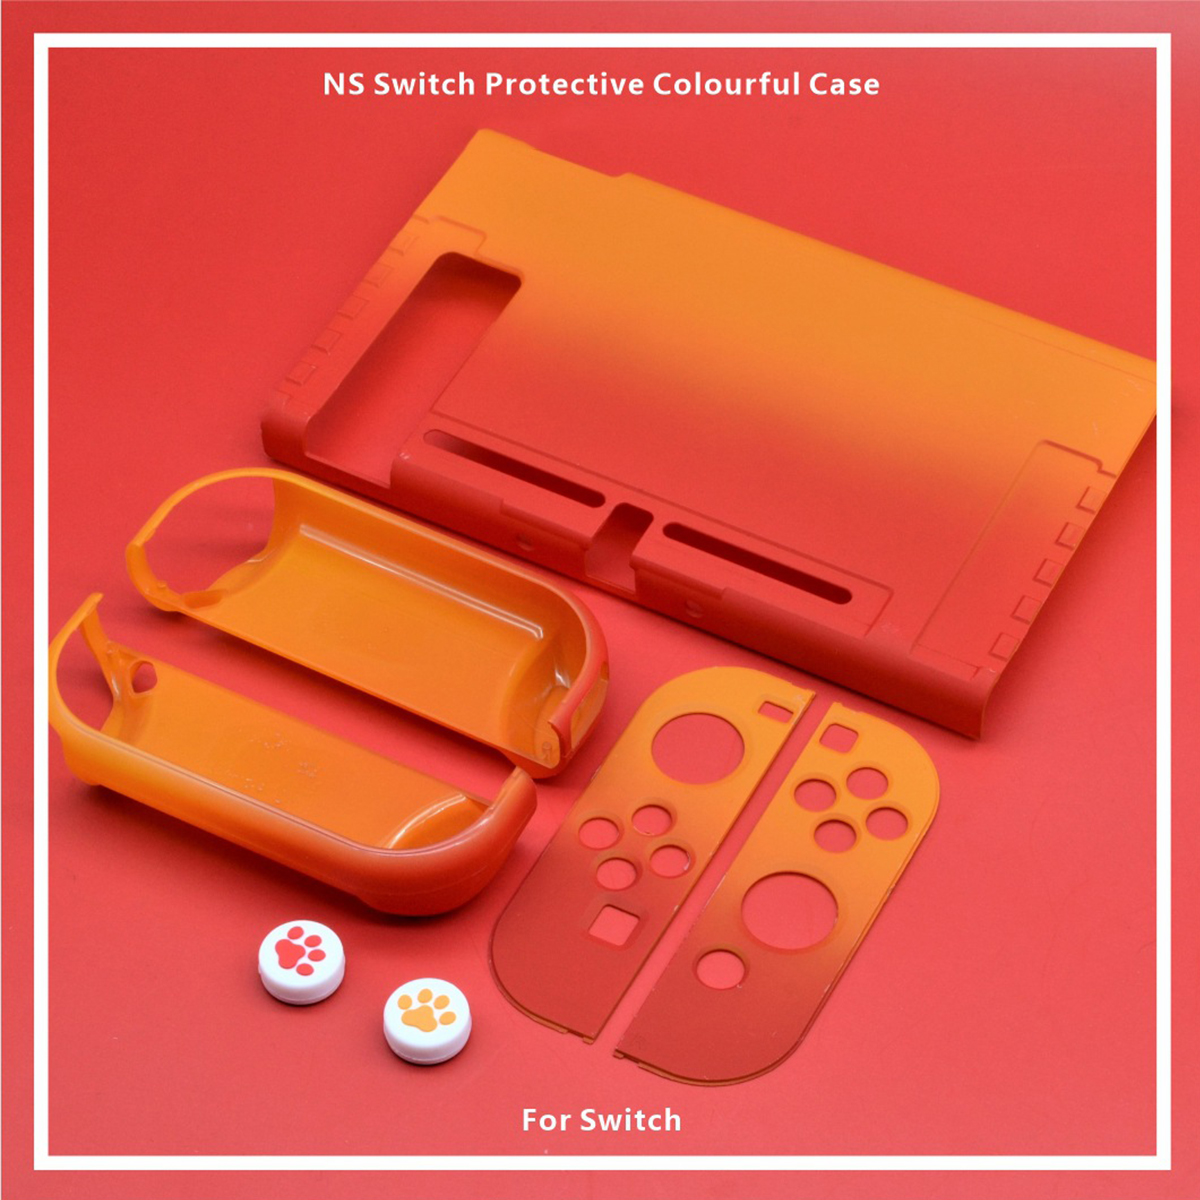 Colorful-Shockproof-Shell-Gradient-Case-Protector-for-Nintendo-Switch-Game-Console-Protective-Hard-C-1737853-6